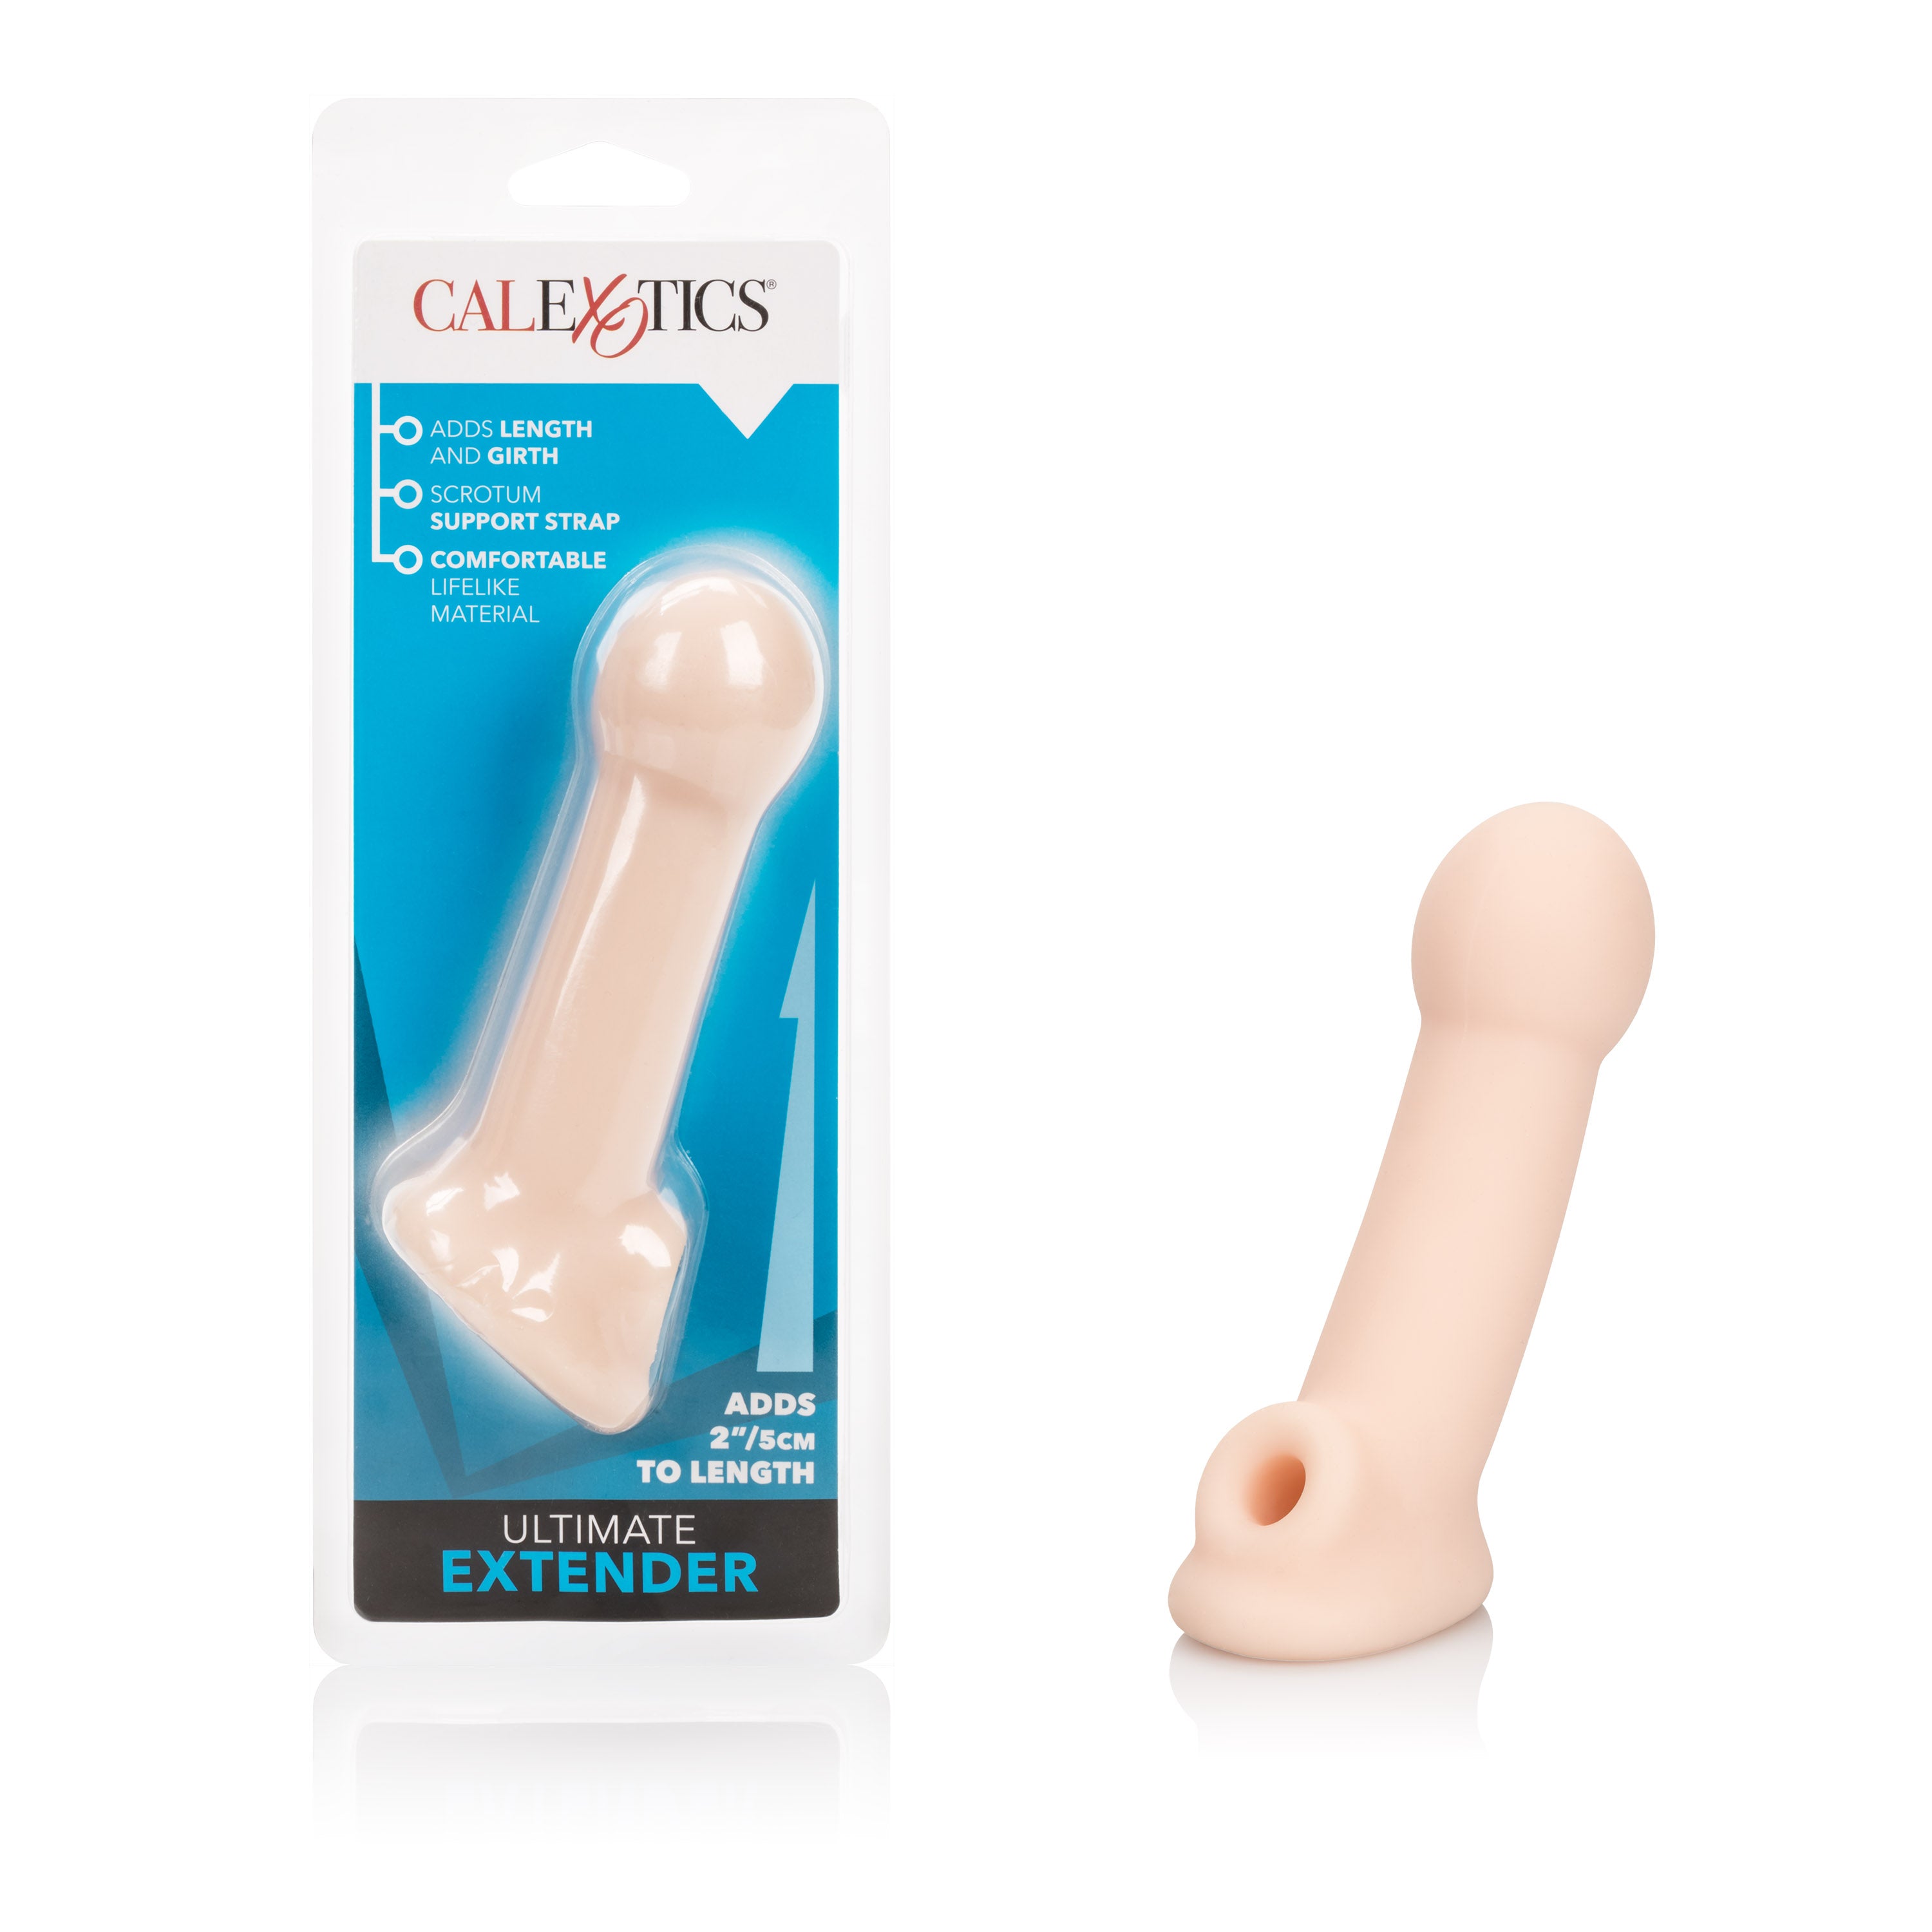 Experience Your Wildest Desires with the Ultimate Extender Penis Sleeve